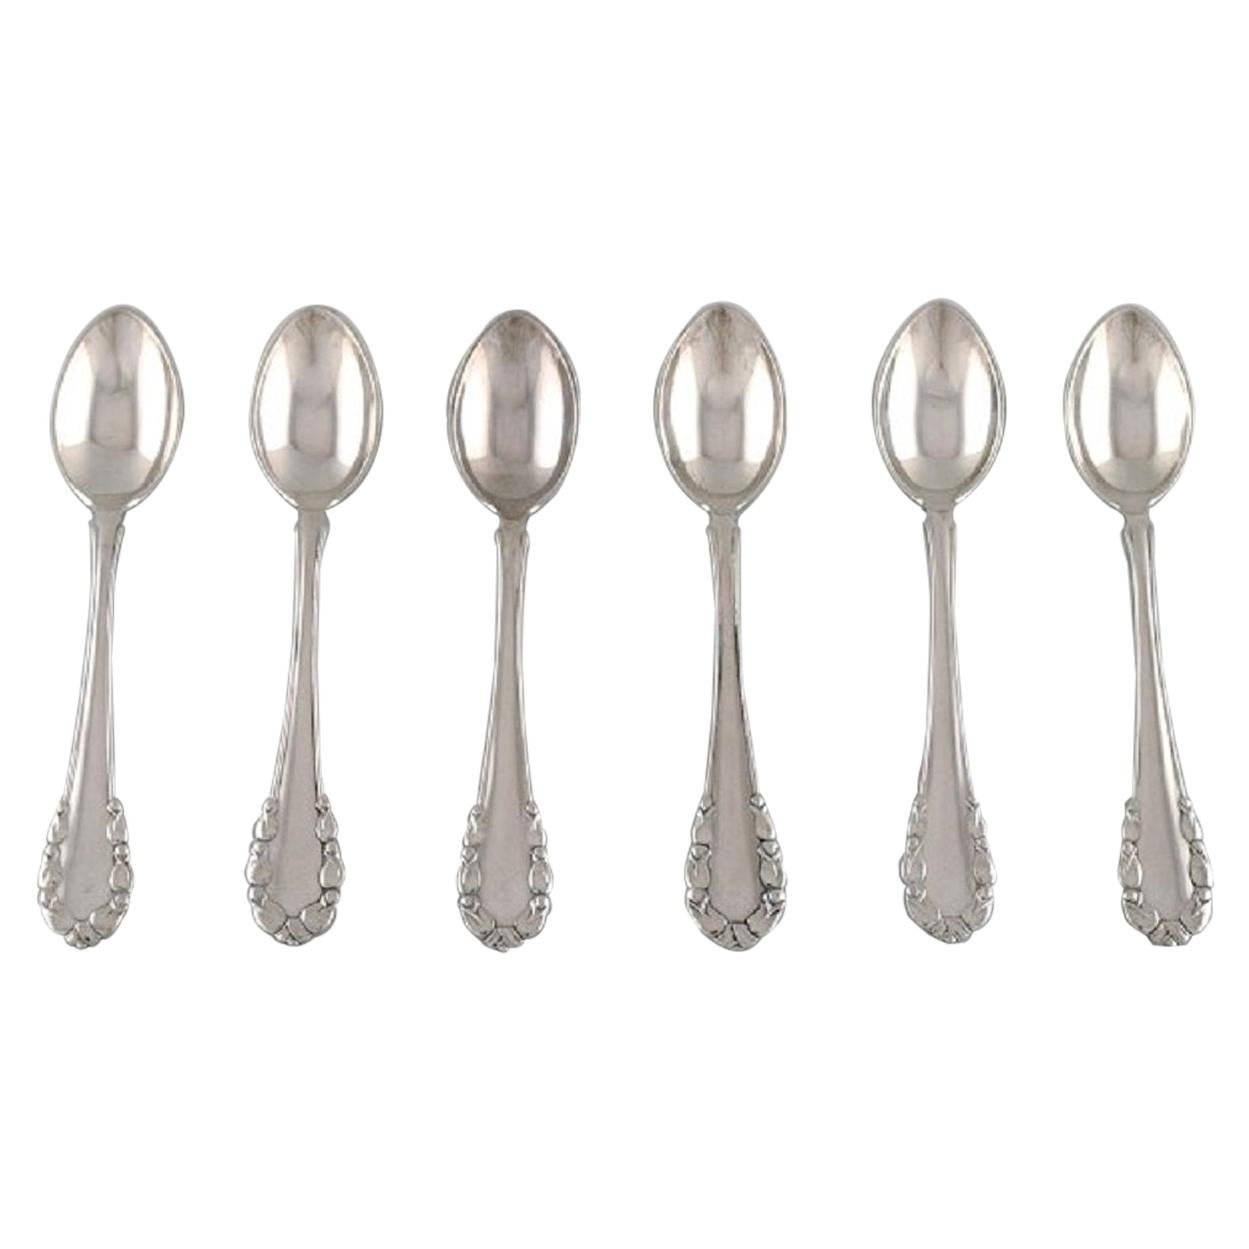 Georg Jensen "Lily of the Valley", Six Coffee Spoons in All Silver, 1915-1930